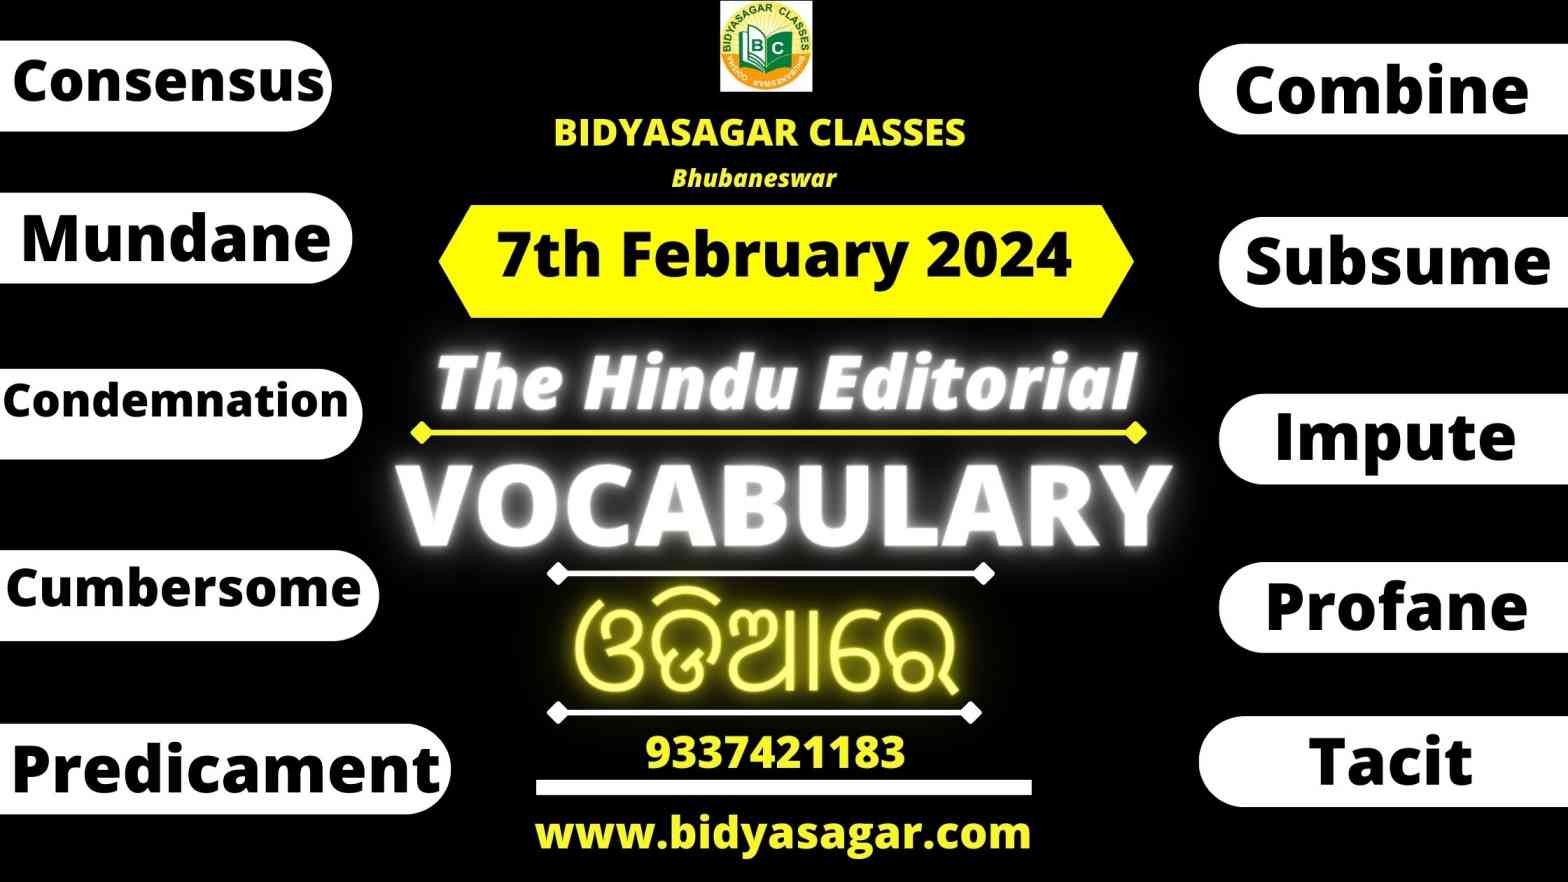 The Hindu Editorial Vocabulary of 7th February 2024